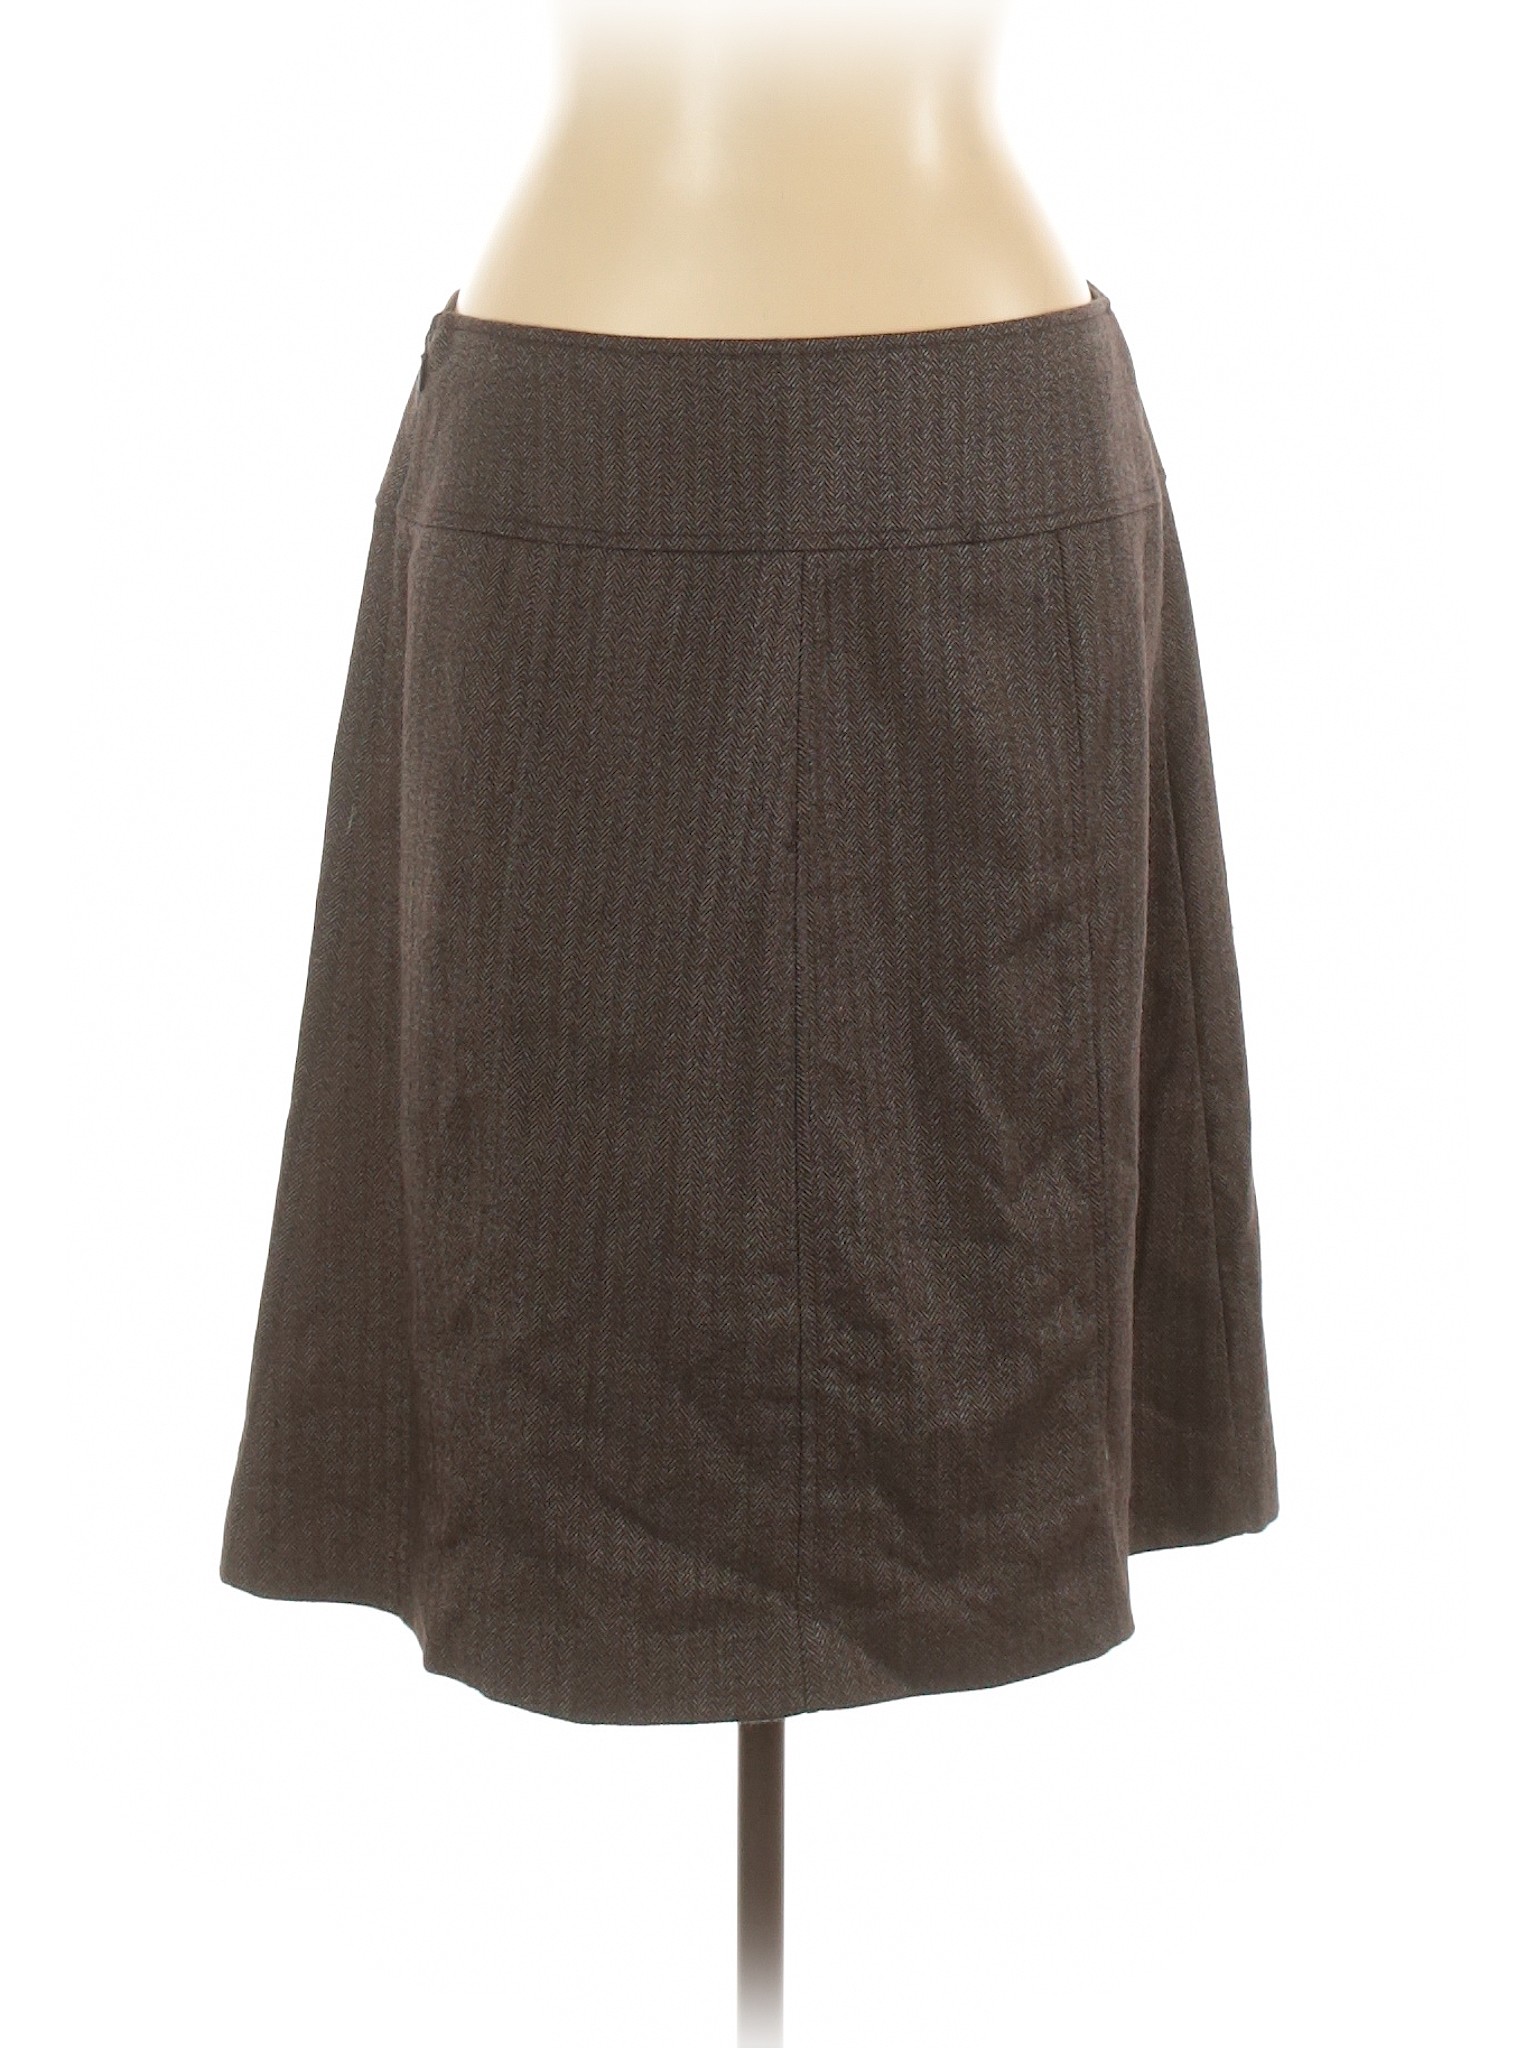 Apt. 9 Women's Classic Skirts On Sale Up To 90% Off Retail | thredUP